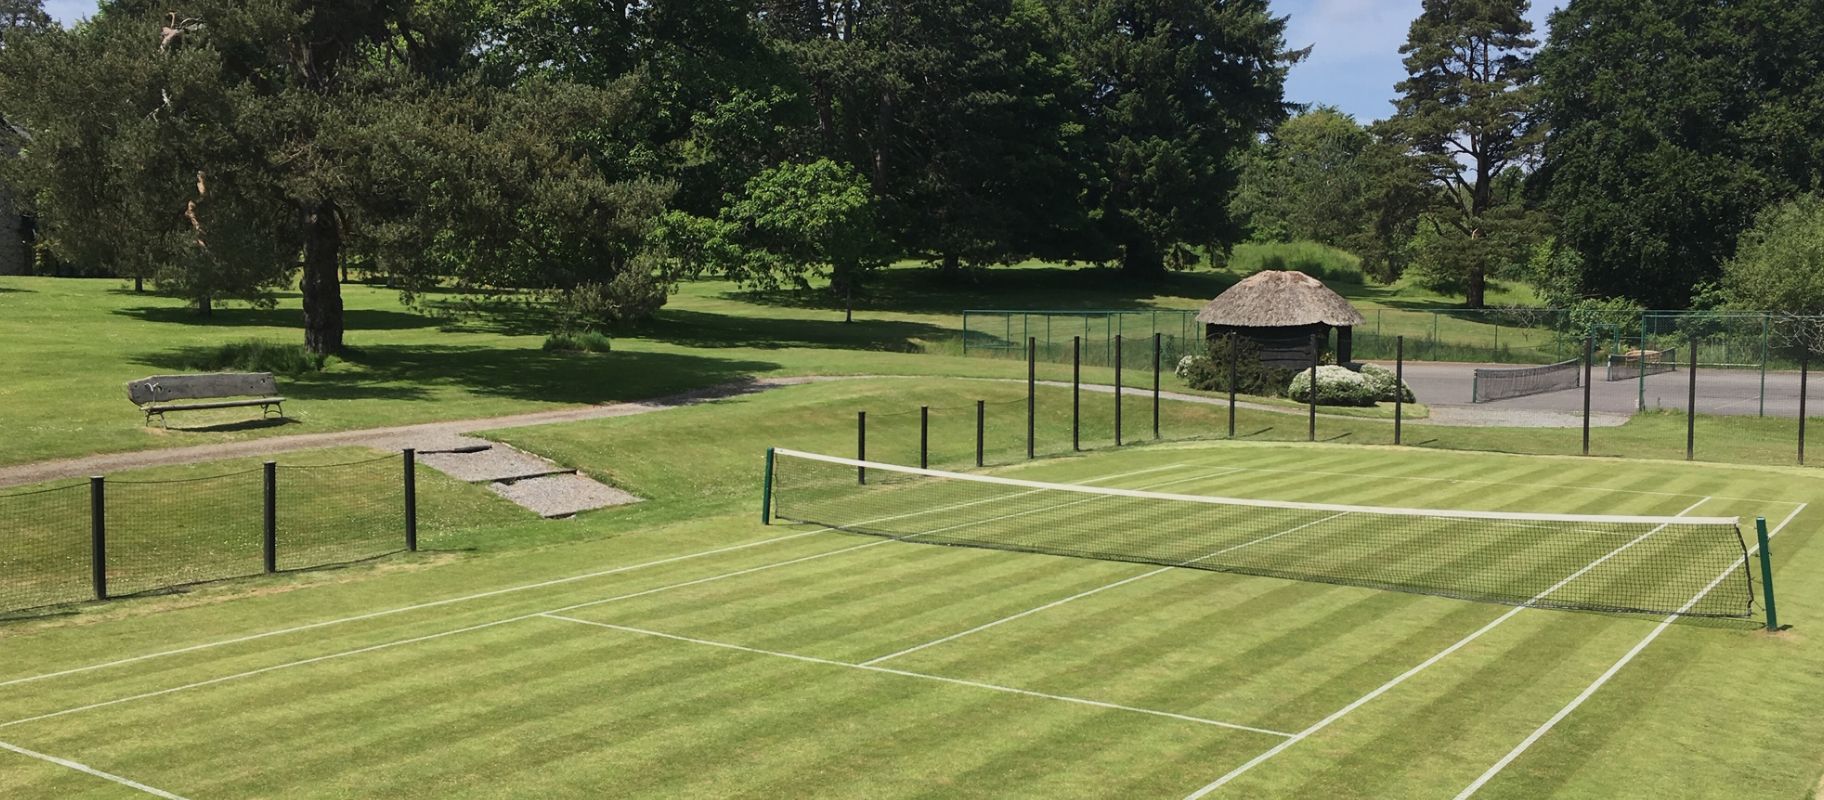 Tennis Courts at Bovey Castle 